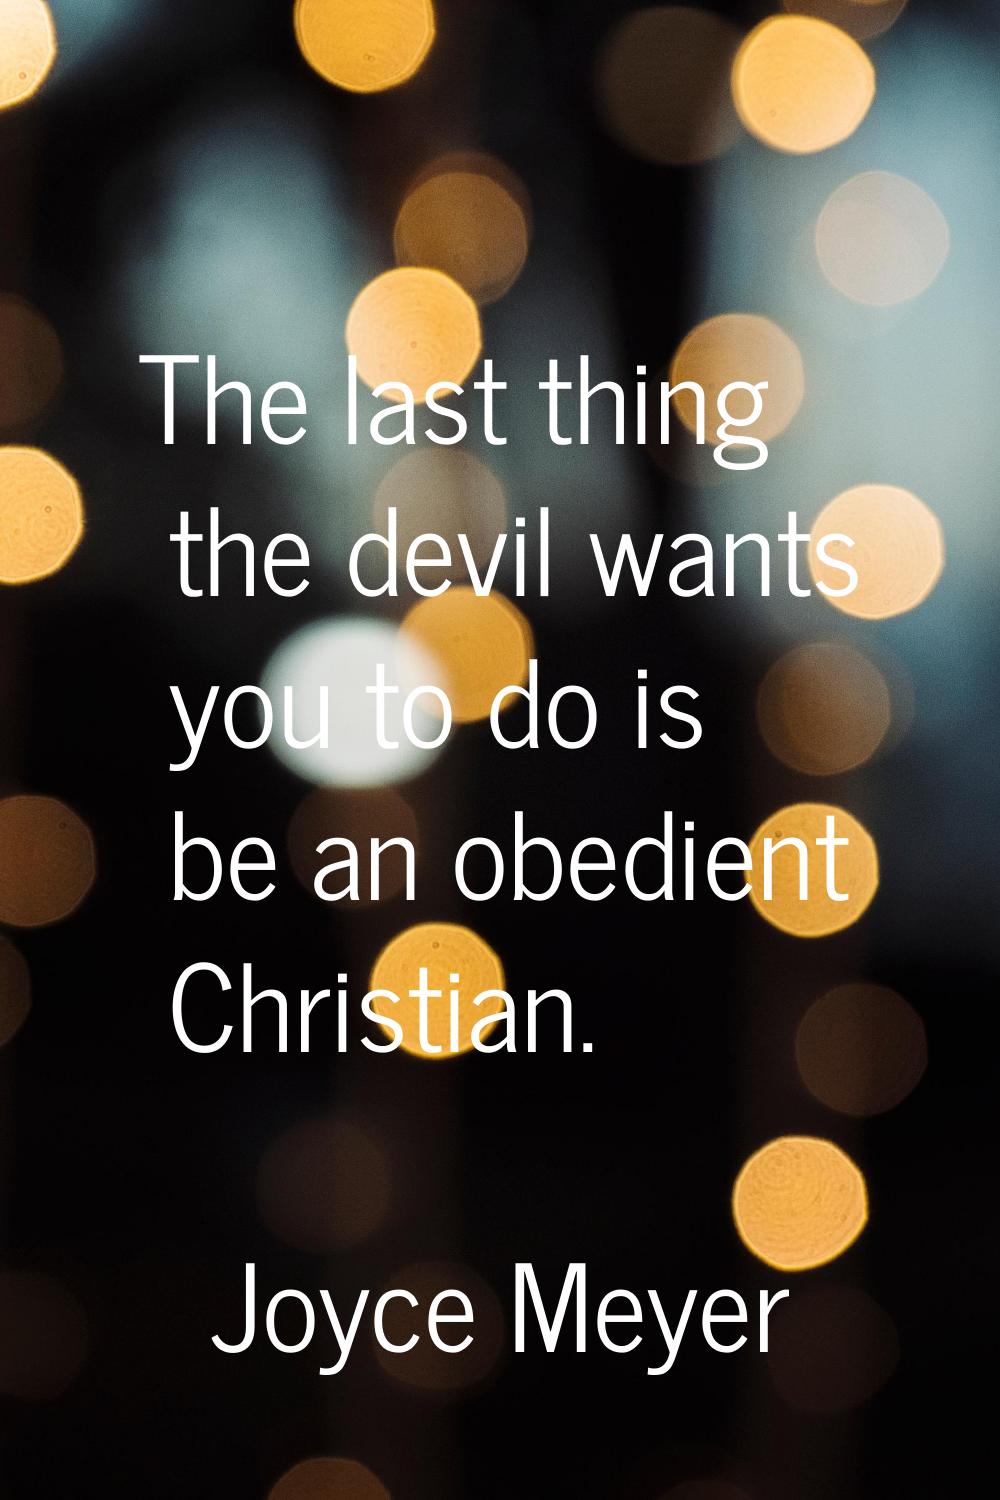 The last thing the devil wants you to do is be an obedient Christian.